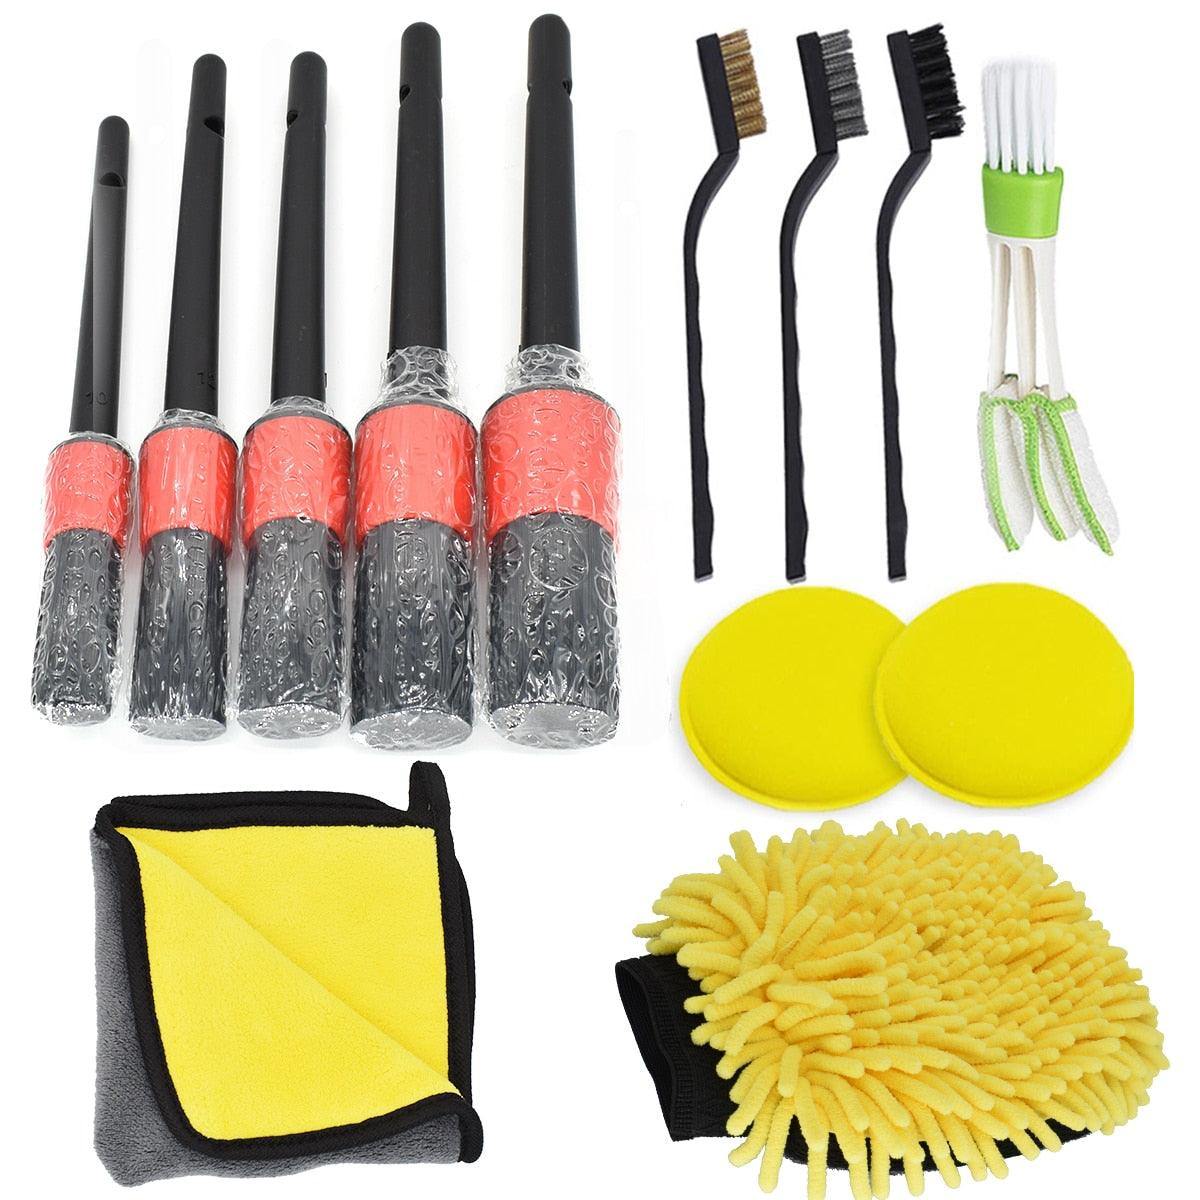 Car cleaning & grooming kit - Sports, Wine & Gadgets